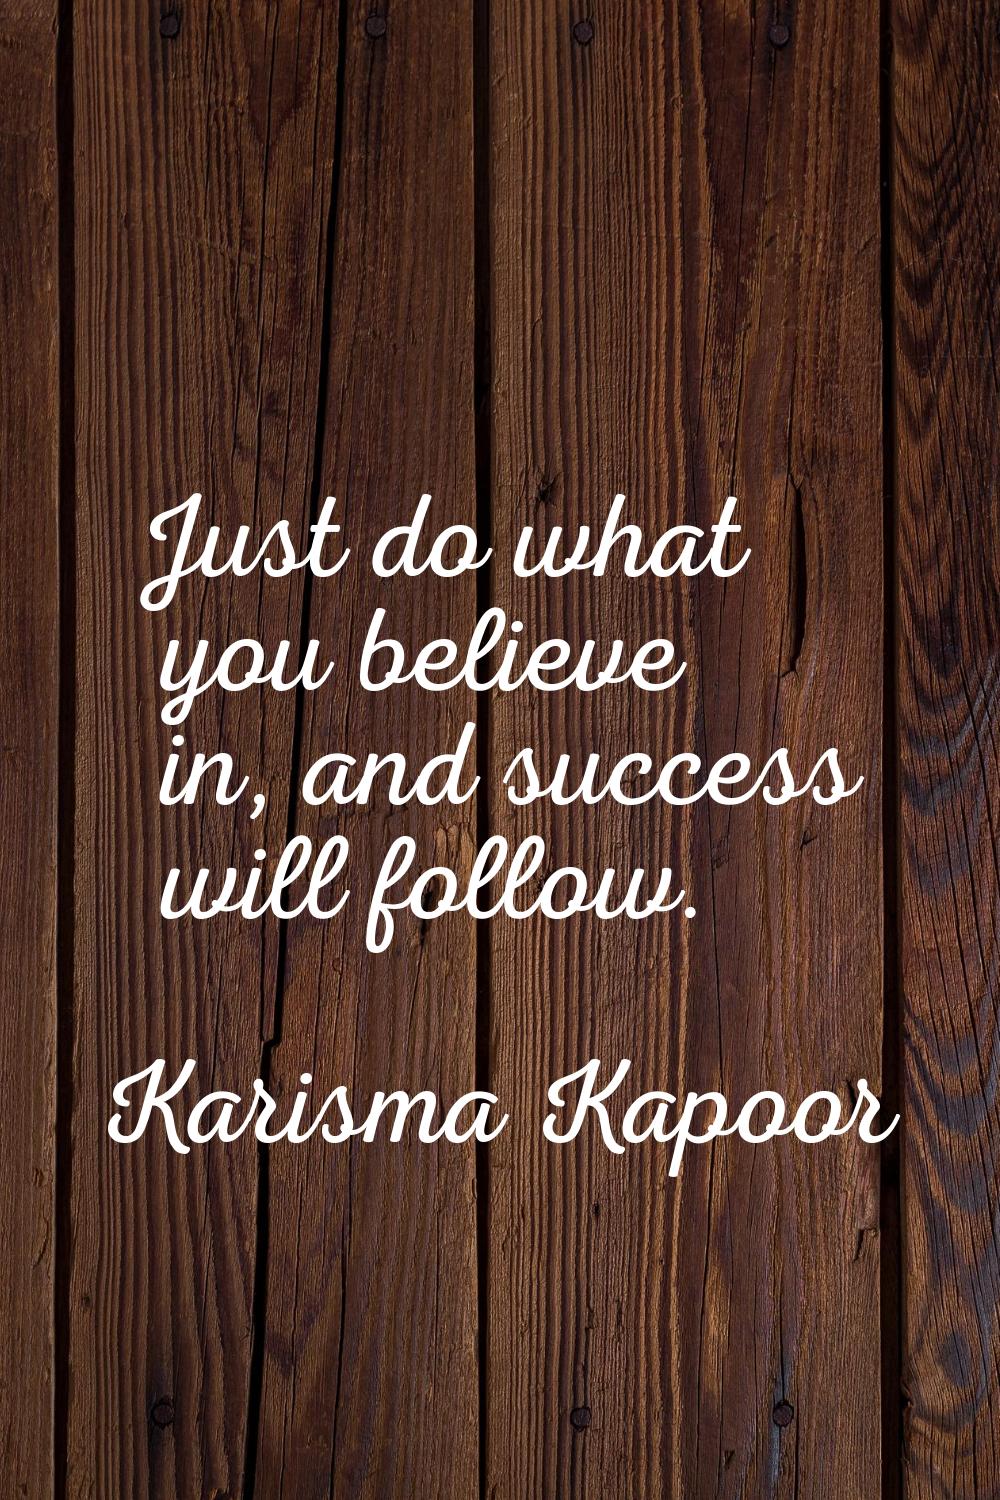 Just do what you believe in, and success will follow.